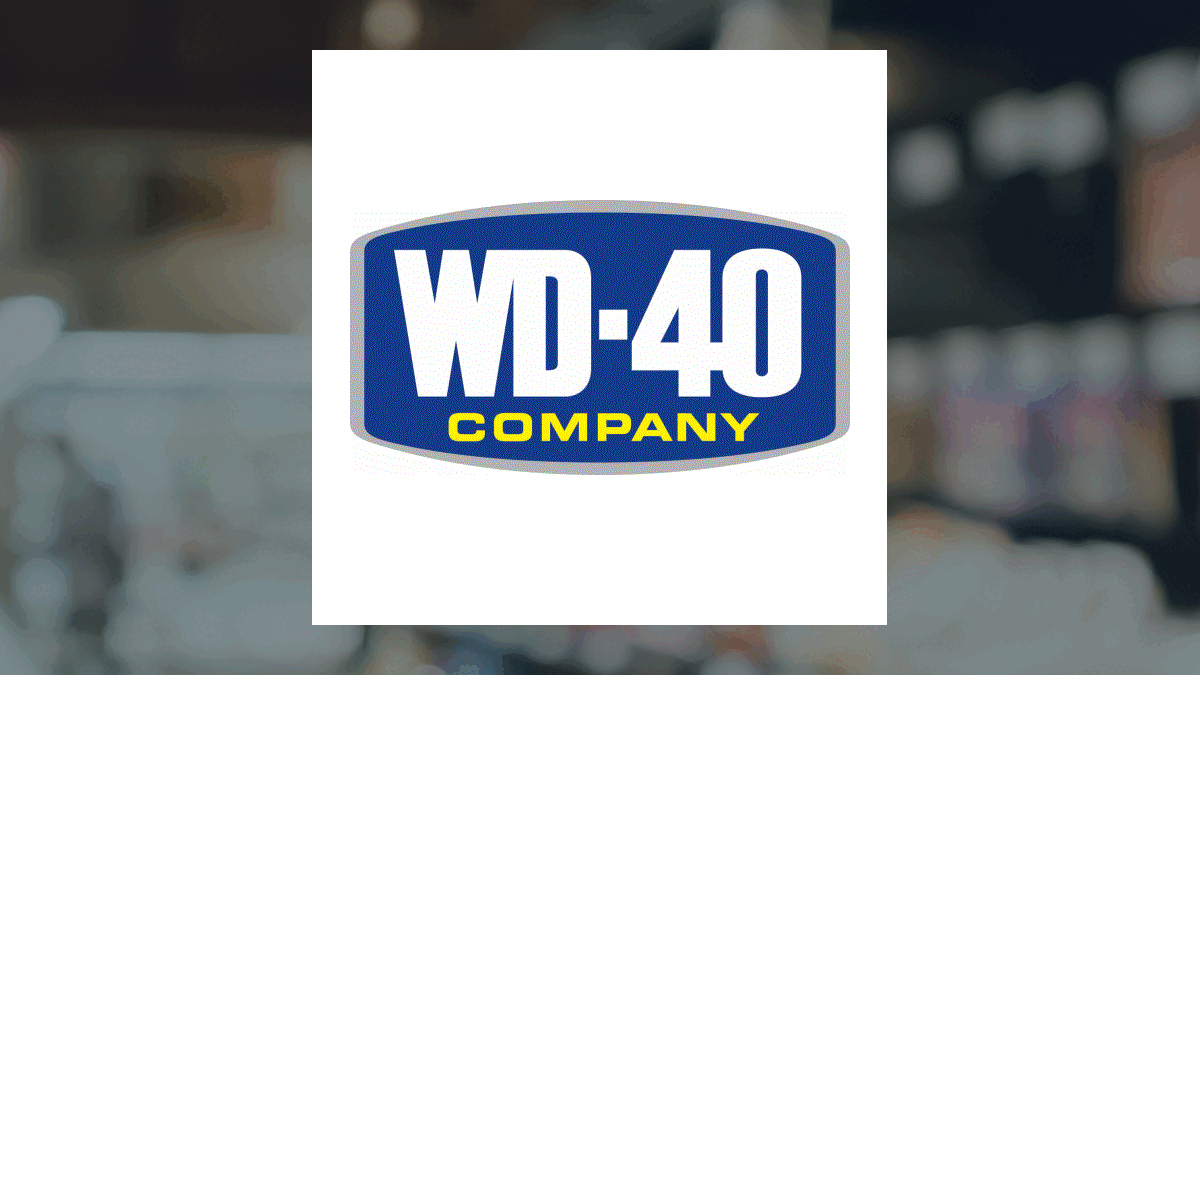 WD-40 Company Announces Board Changes